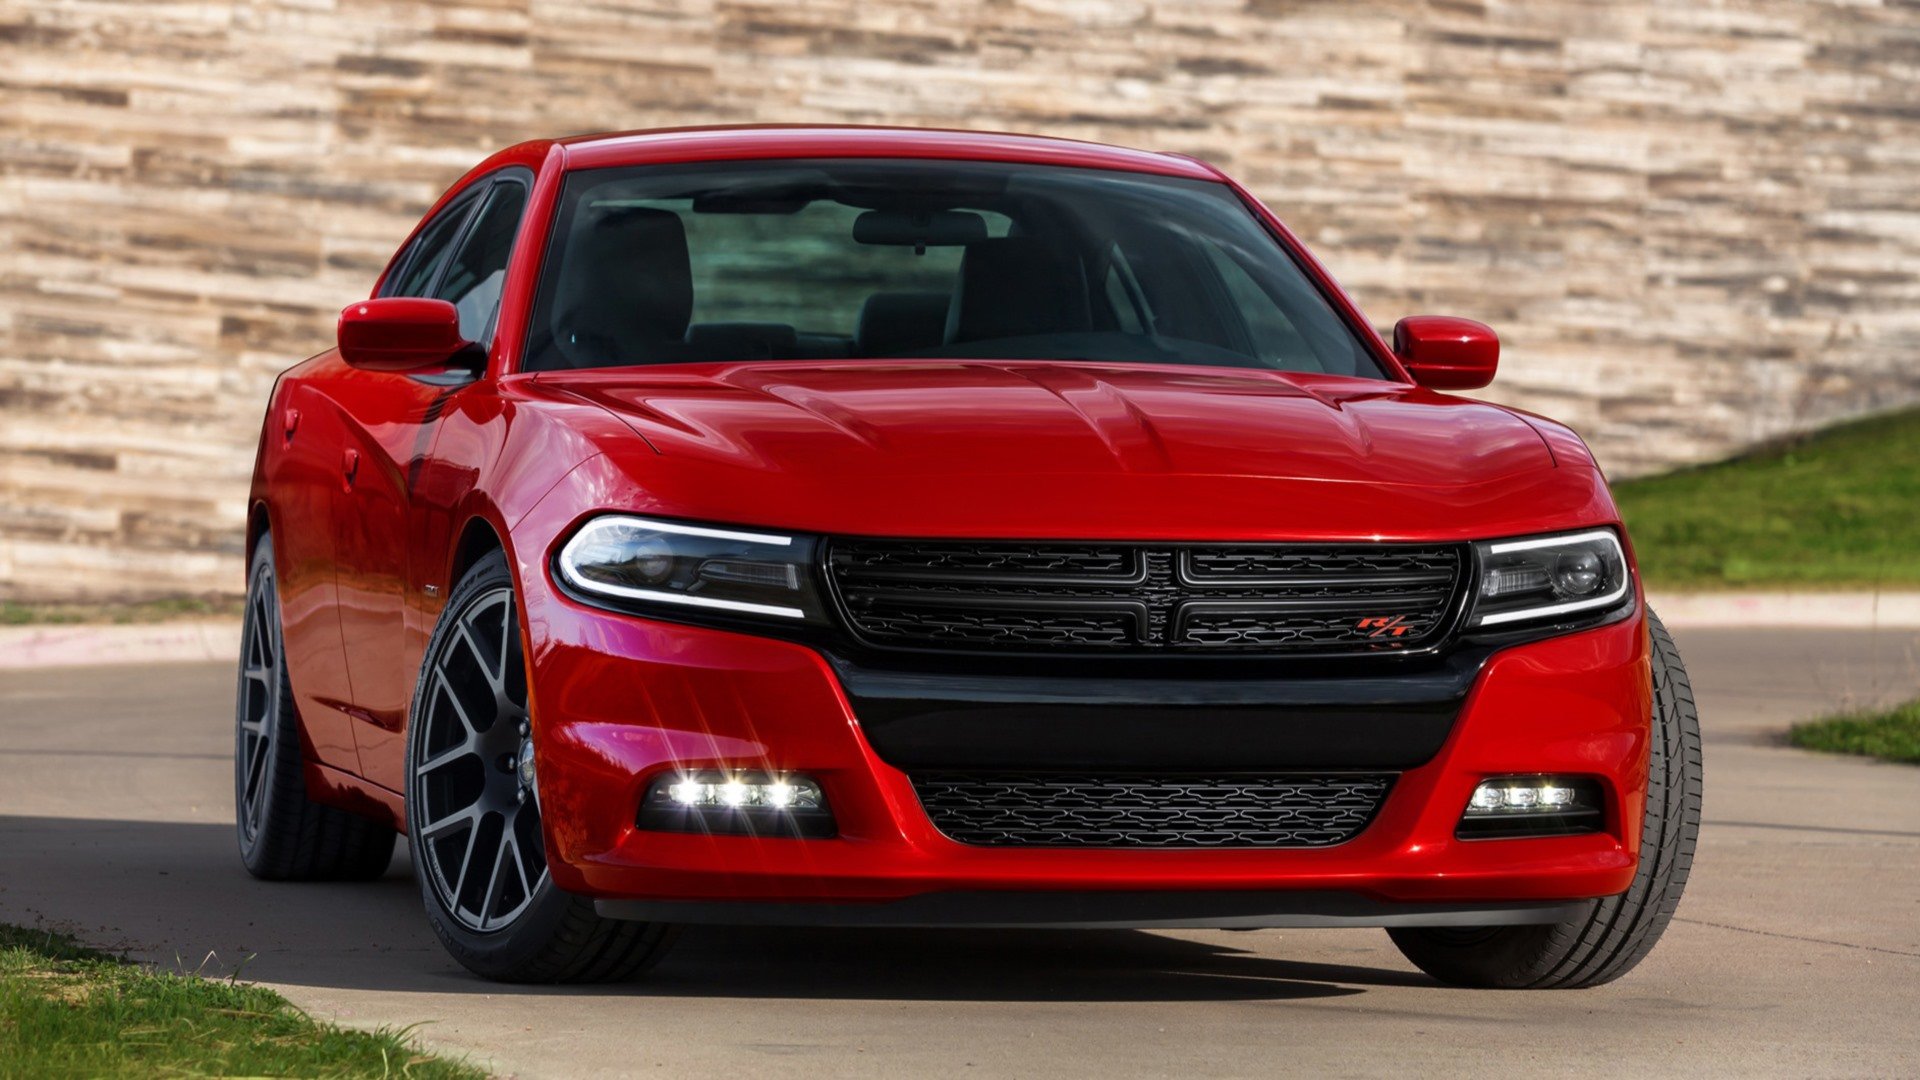 Best Dodge Charger wallpaper ID:451929 for High Resolution full hd 1080p PC